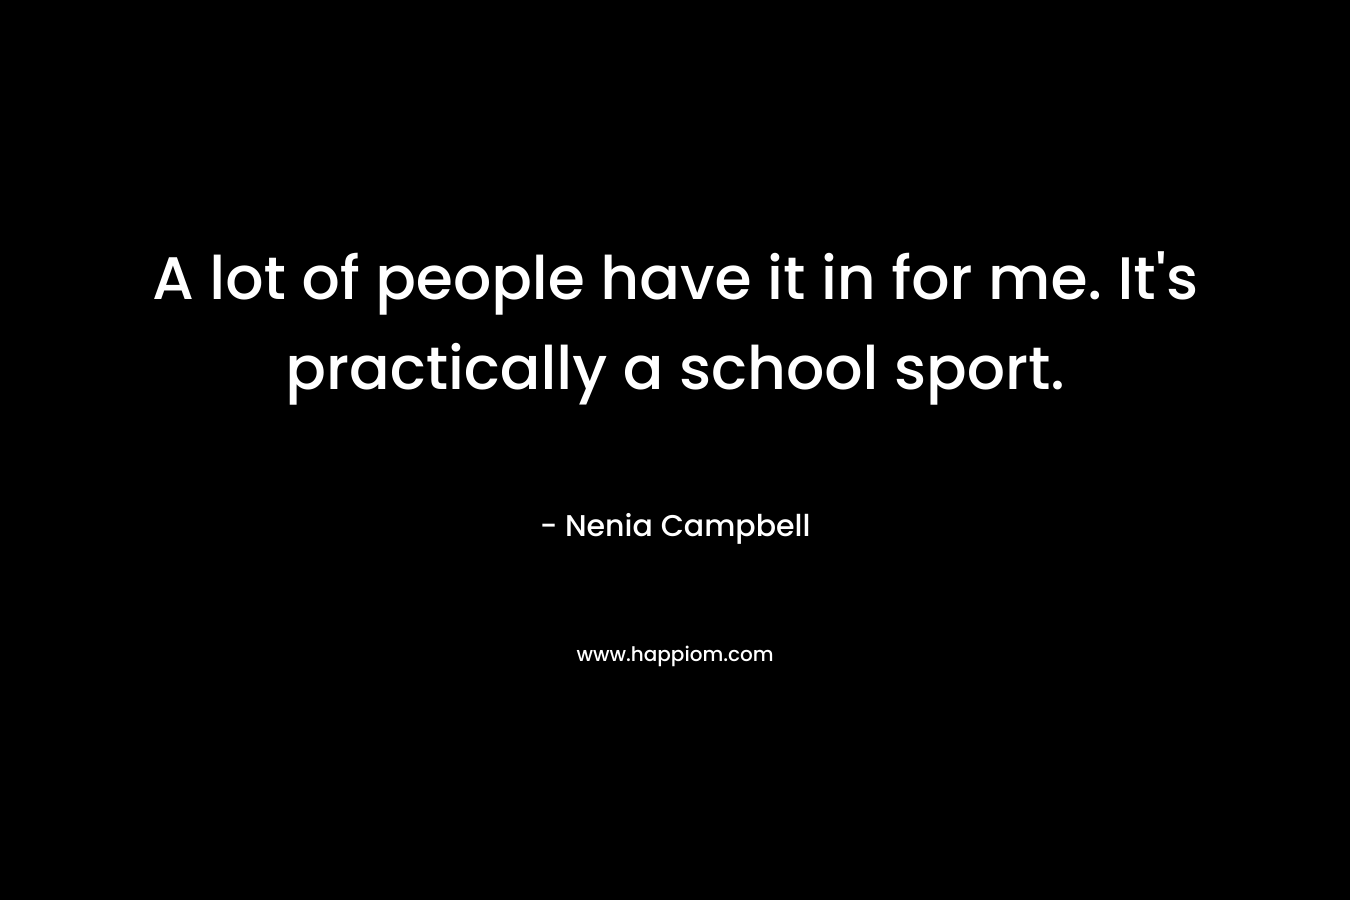 A lot of people have it in for me. It's practically a school sport.